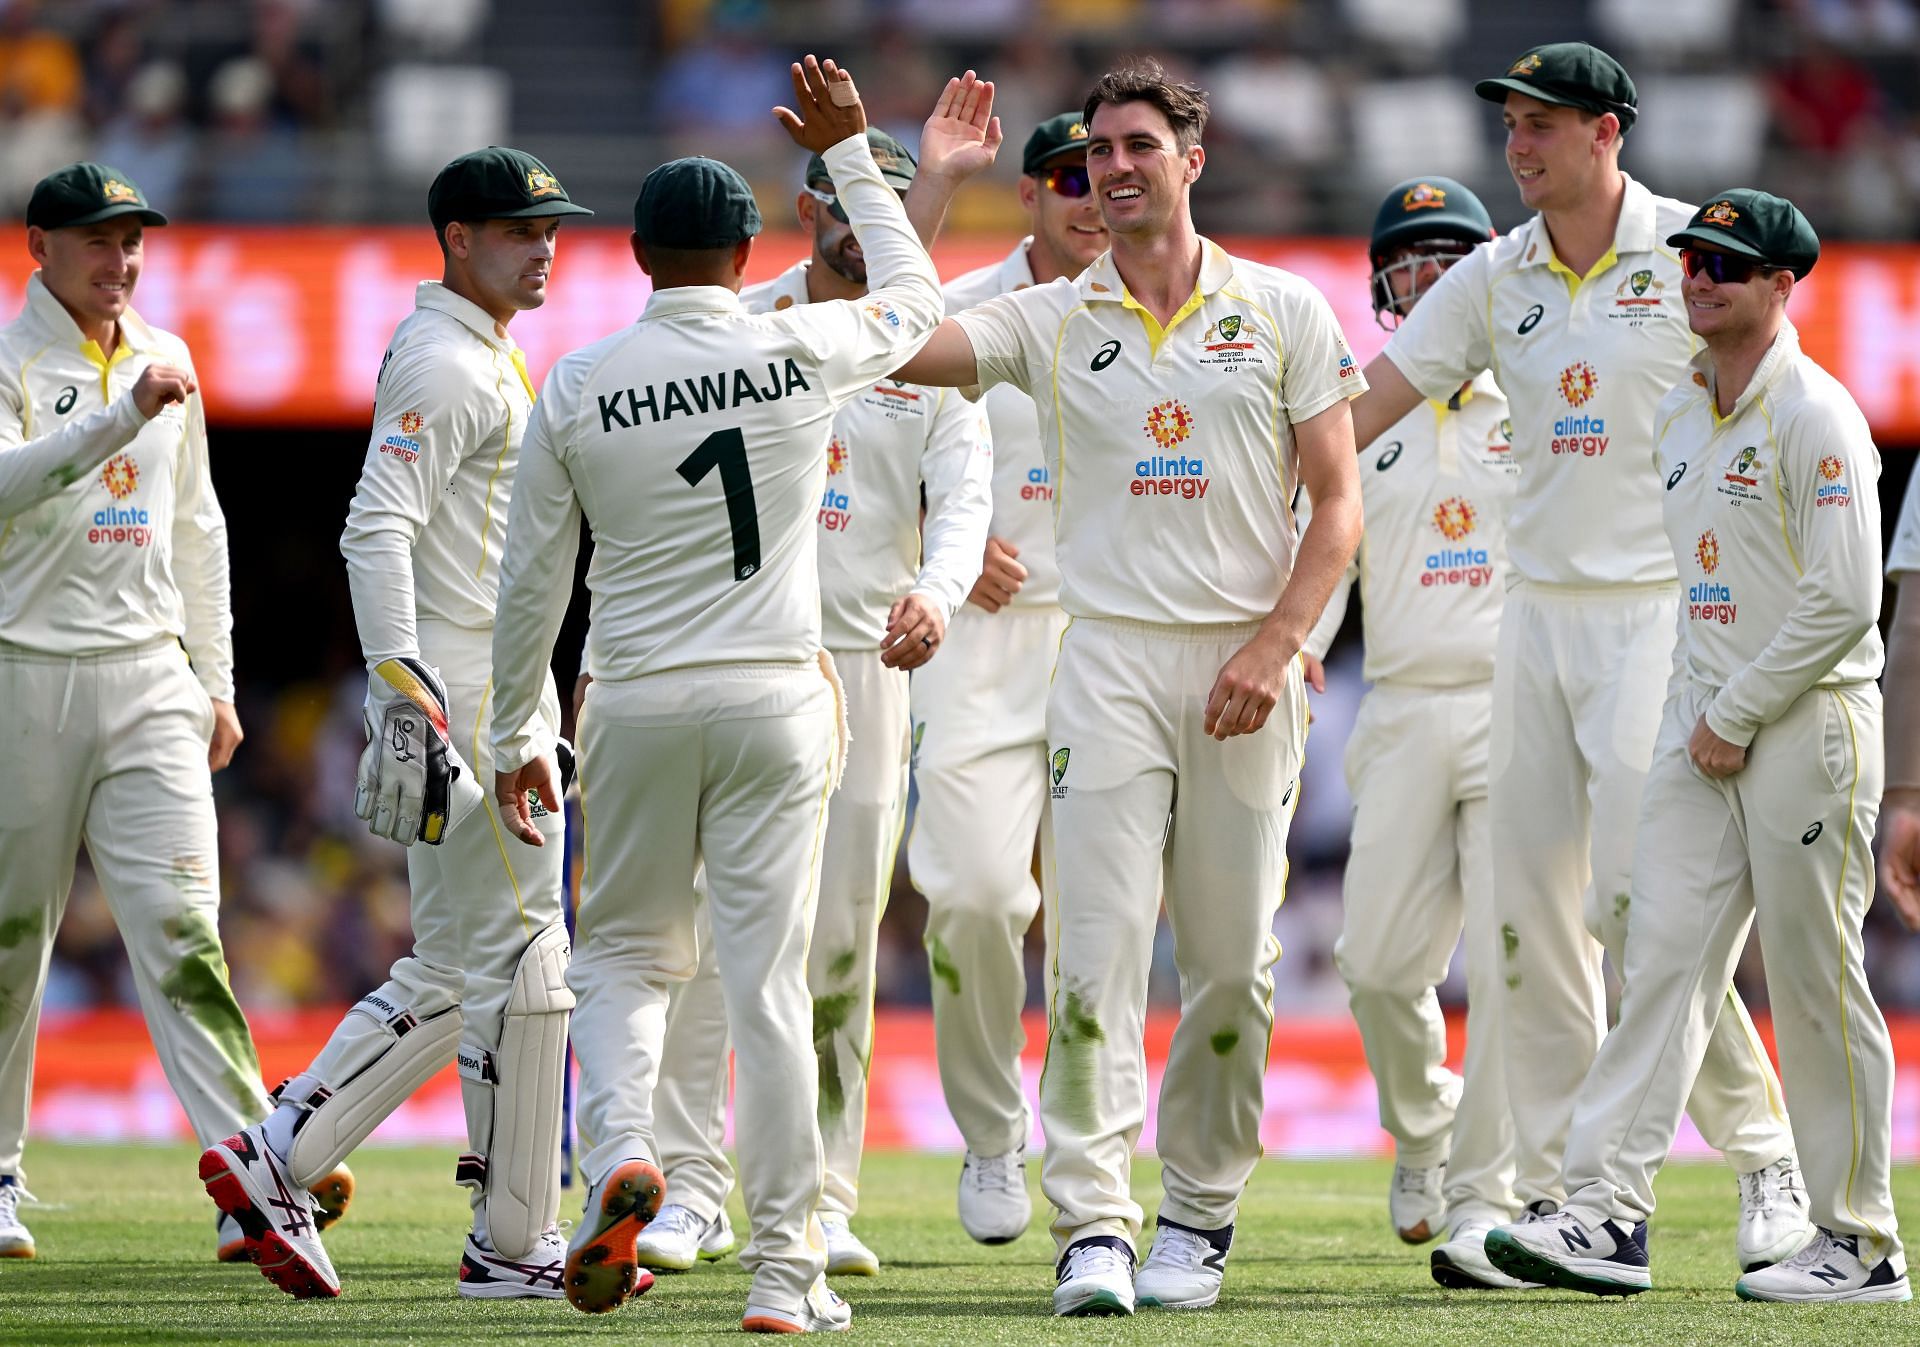 Australia beat South Africa by an innings and 182 runs in Melbourne. (Credits: Getty)